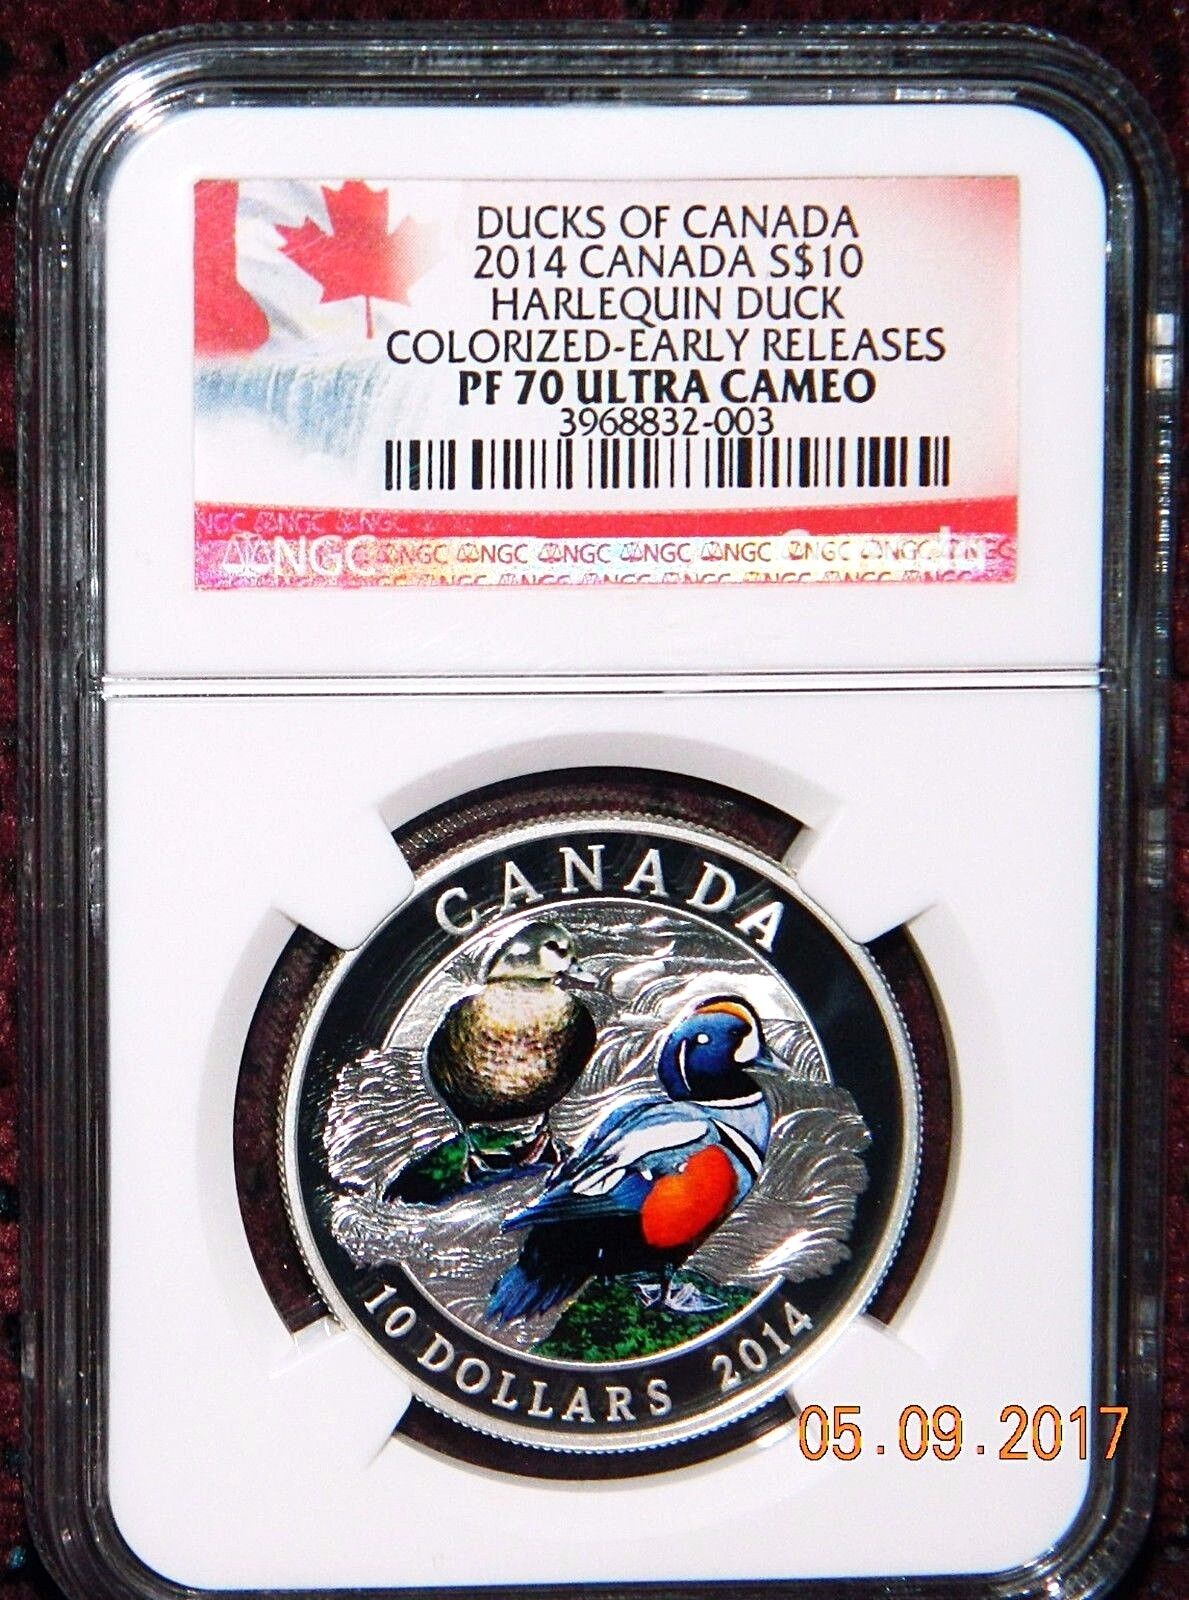 2014 CANADA $10 DUCKS OF CANADA HARLEQUIN DUCK COLORIZED SILVER - NGC PF70 UC ER